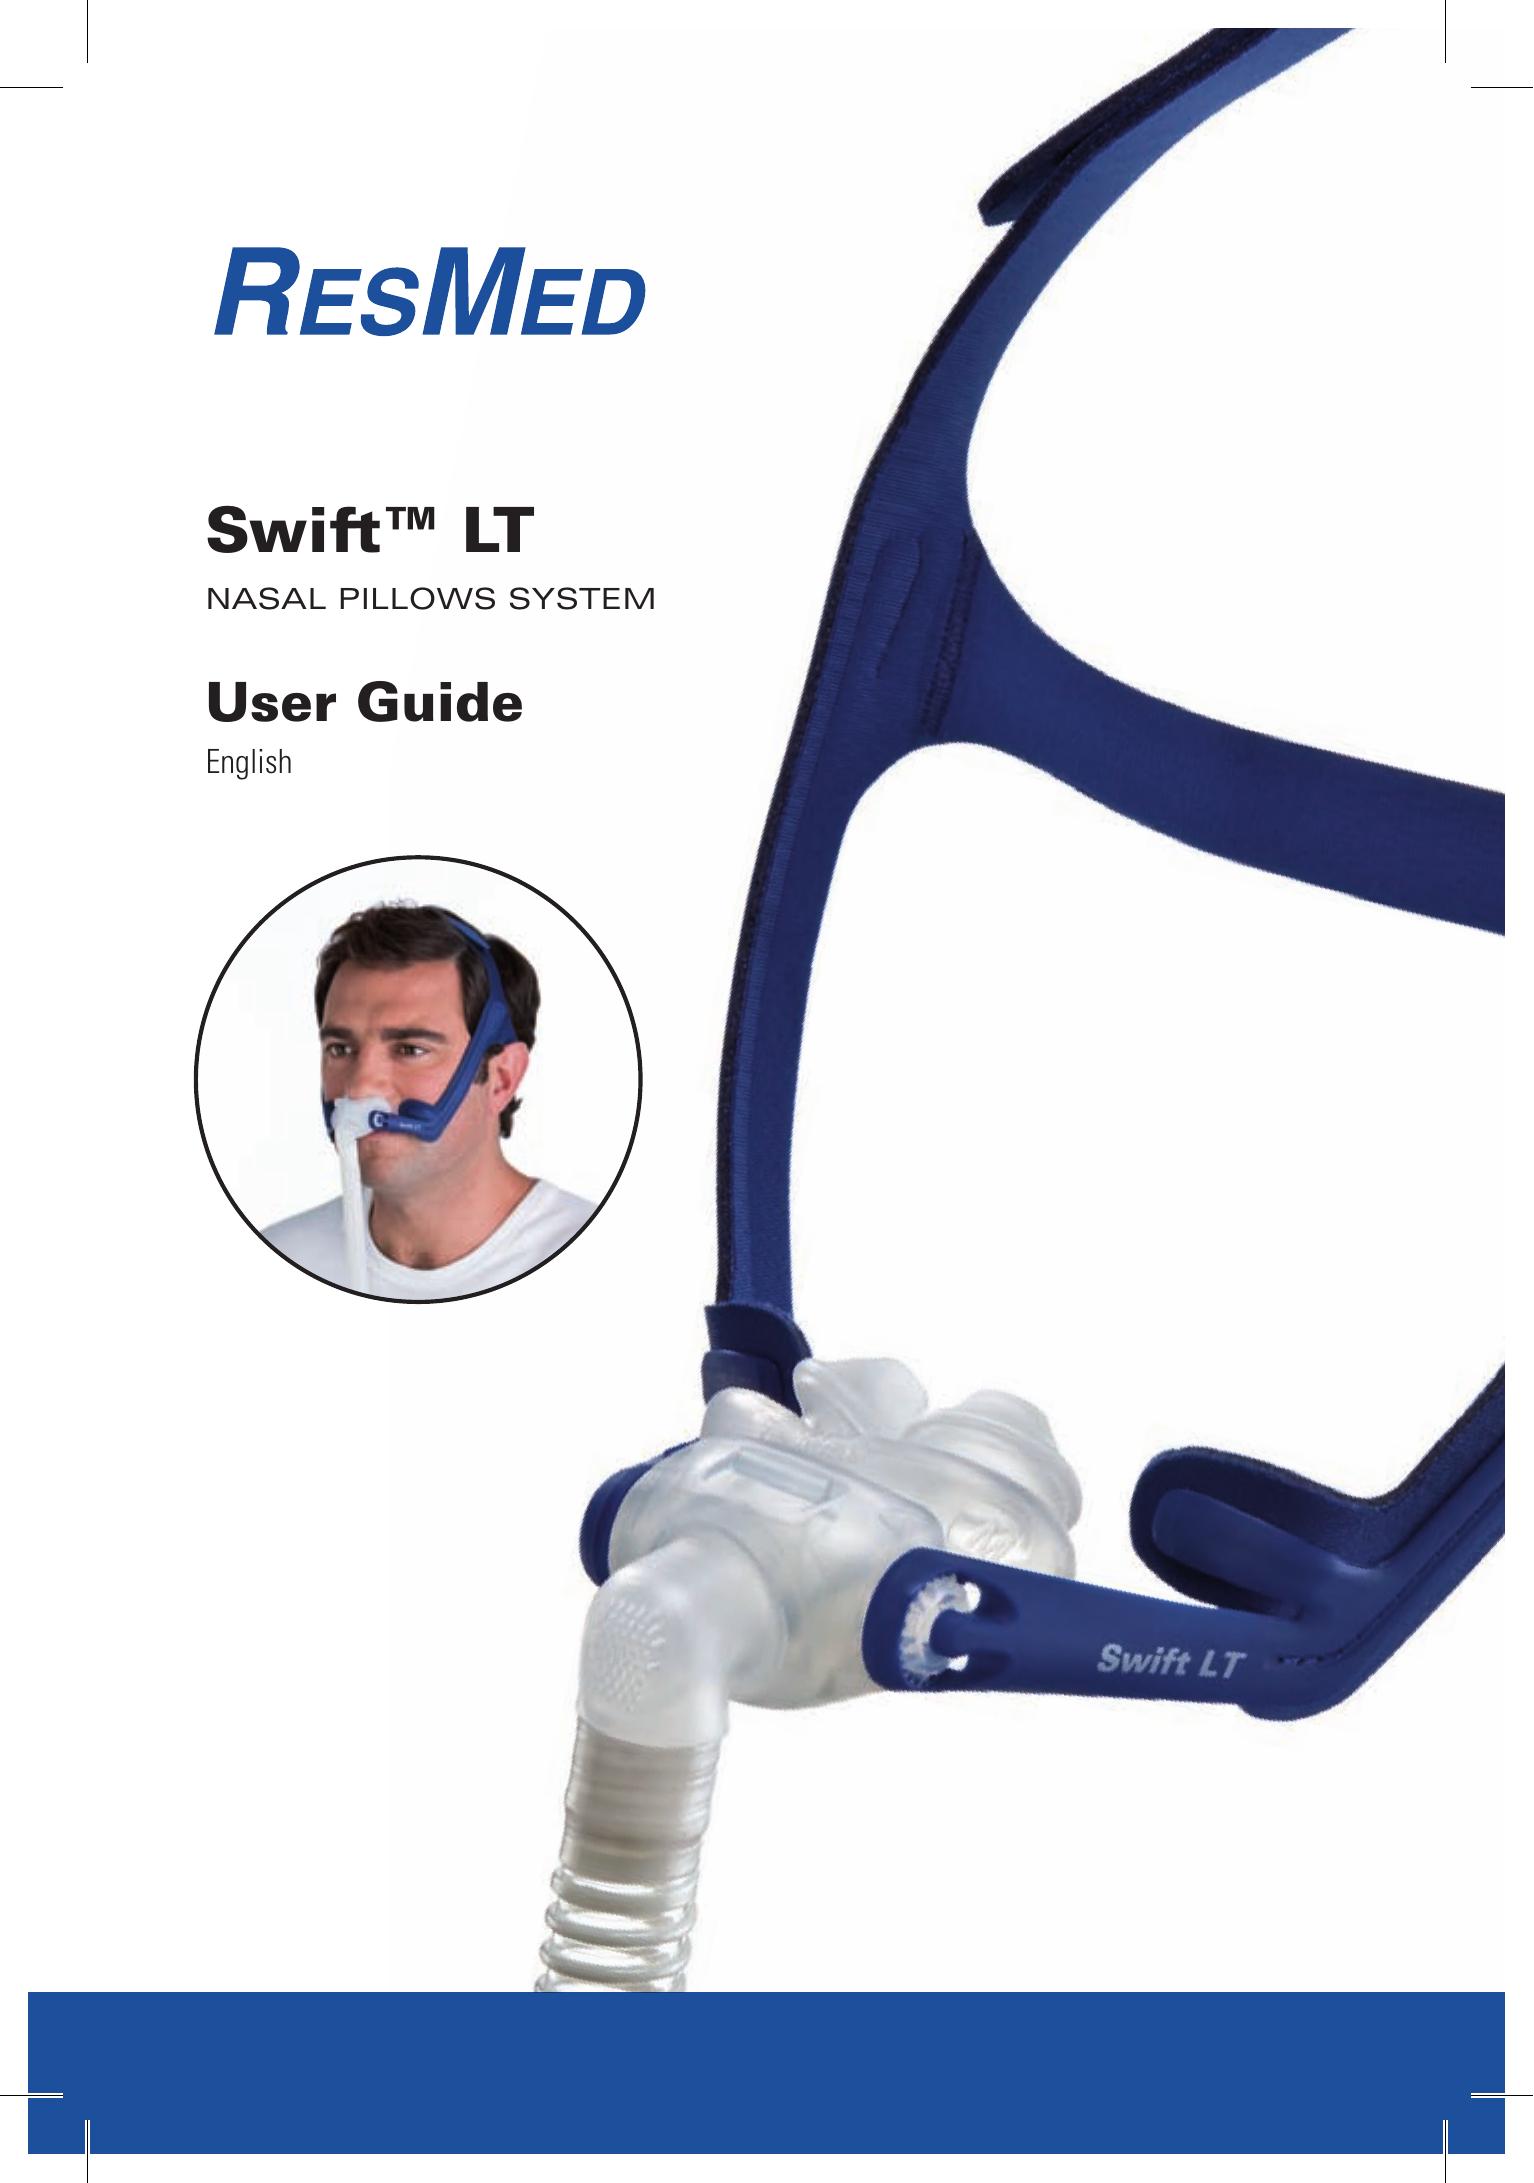 ResMed Swift LT Respiratory Product User Manual